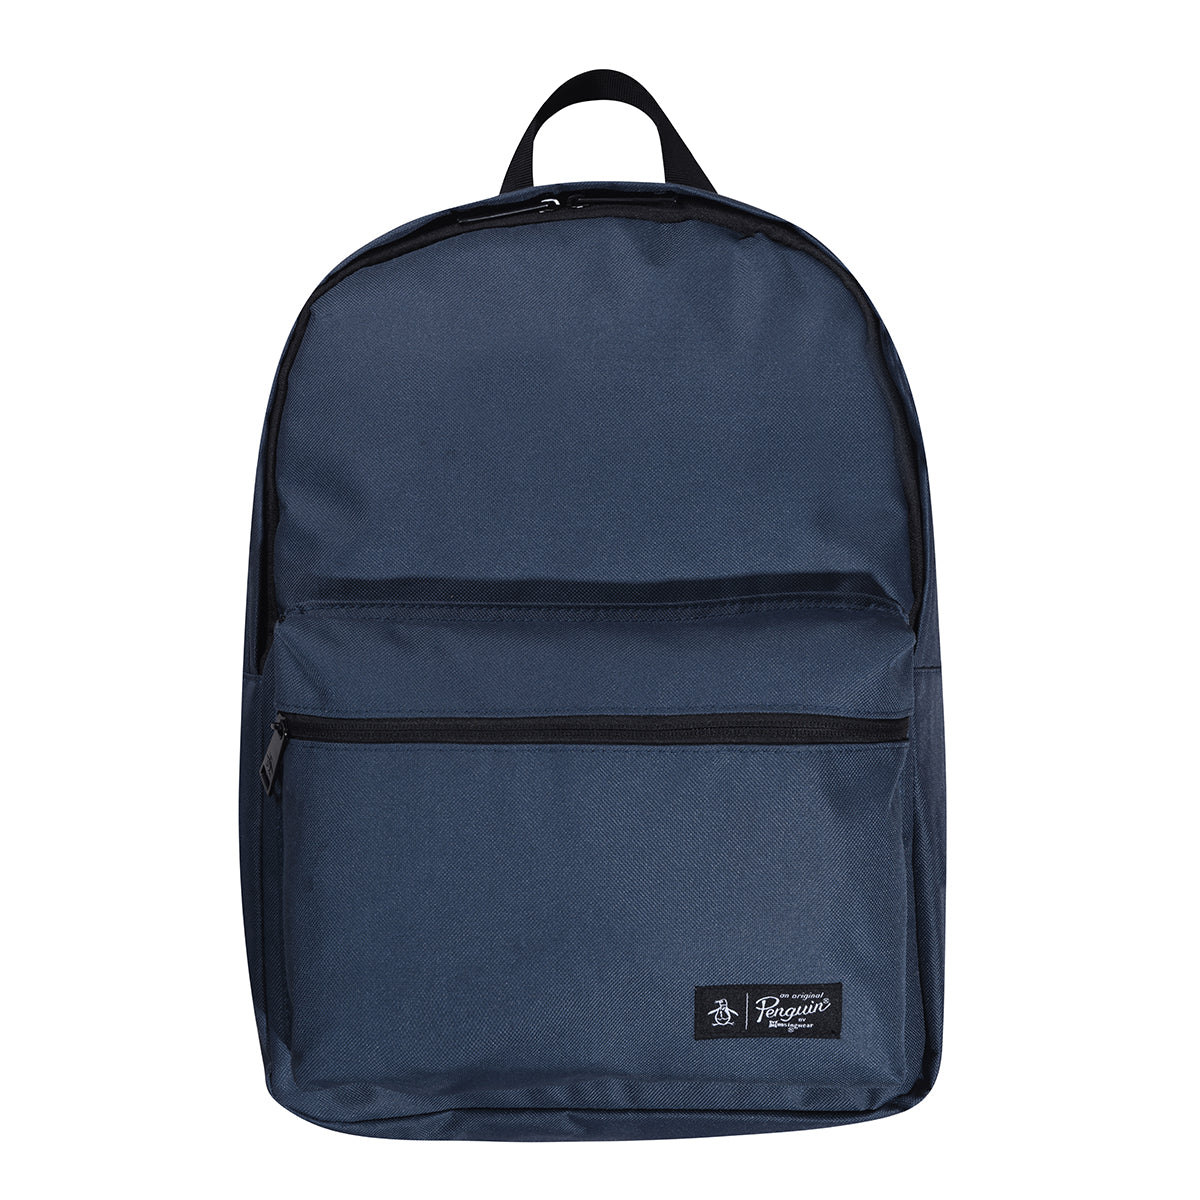 View Jacob Classic Colourblock Backpack In Navy information